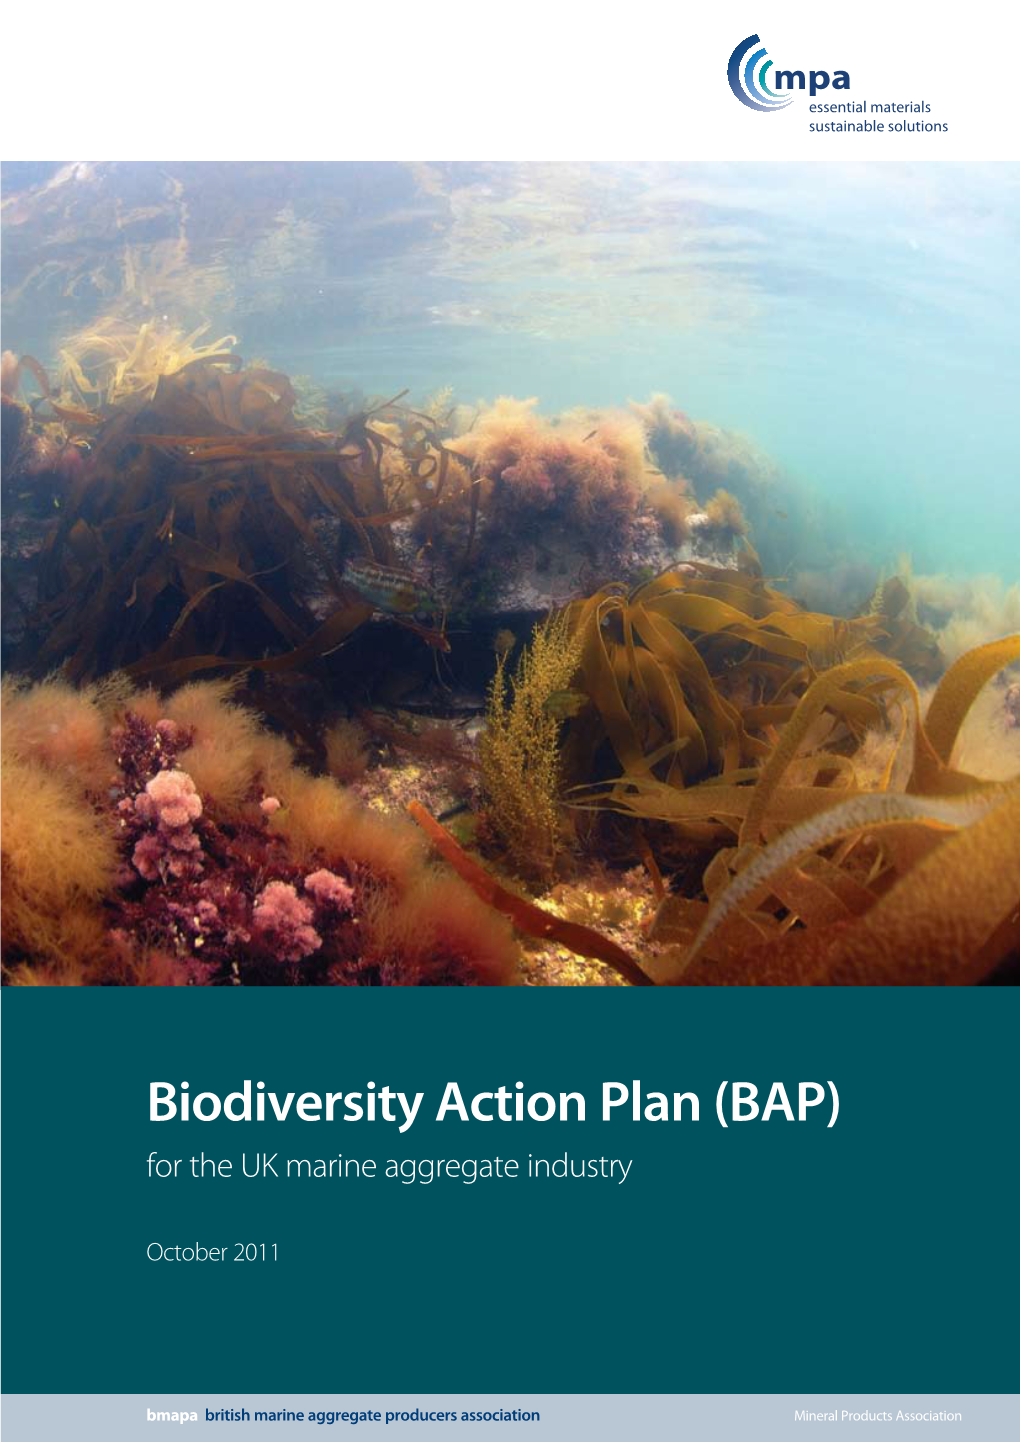 Biodiversity Action Plan (BAP) for the UK Marine Aggregate Industry